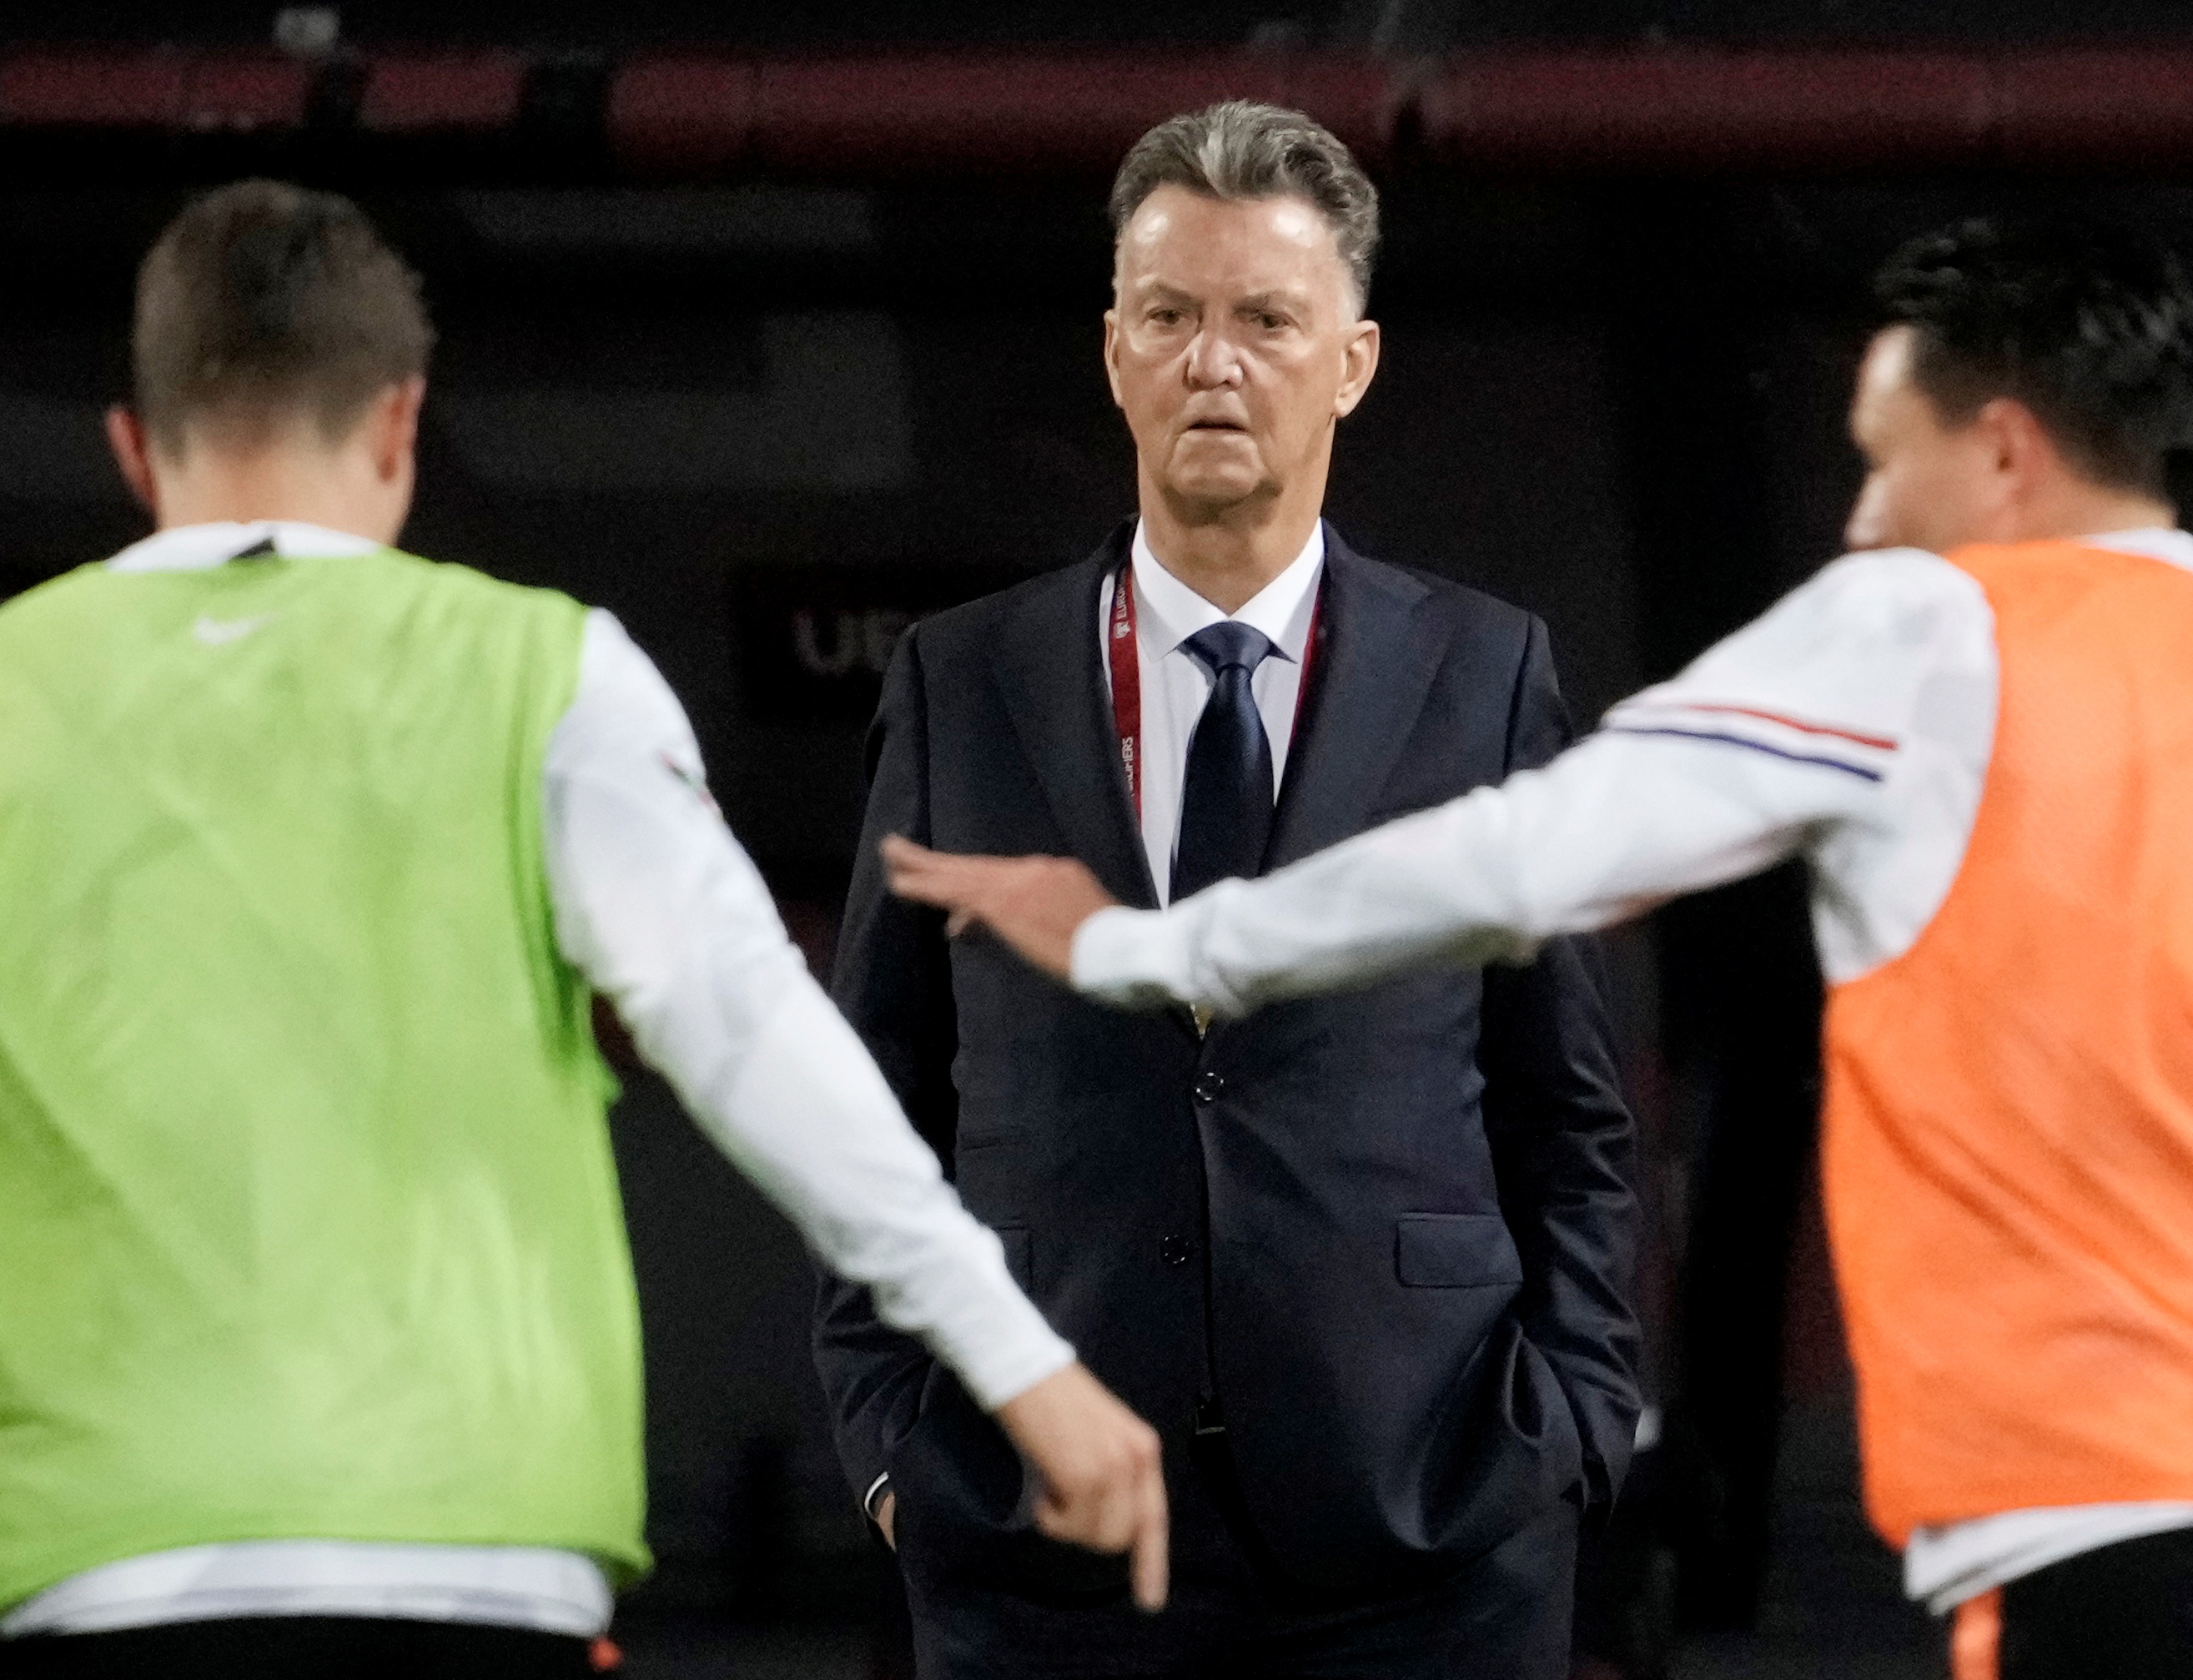 Dutchman Louis van Gaal announced that he is suffering from “aggressive” prostate cancer